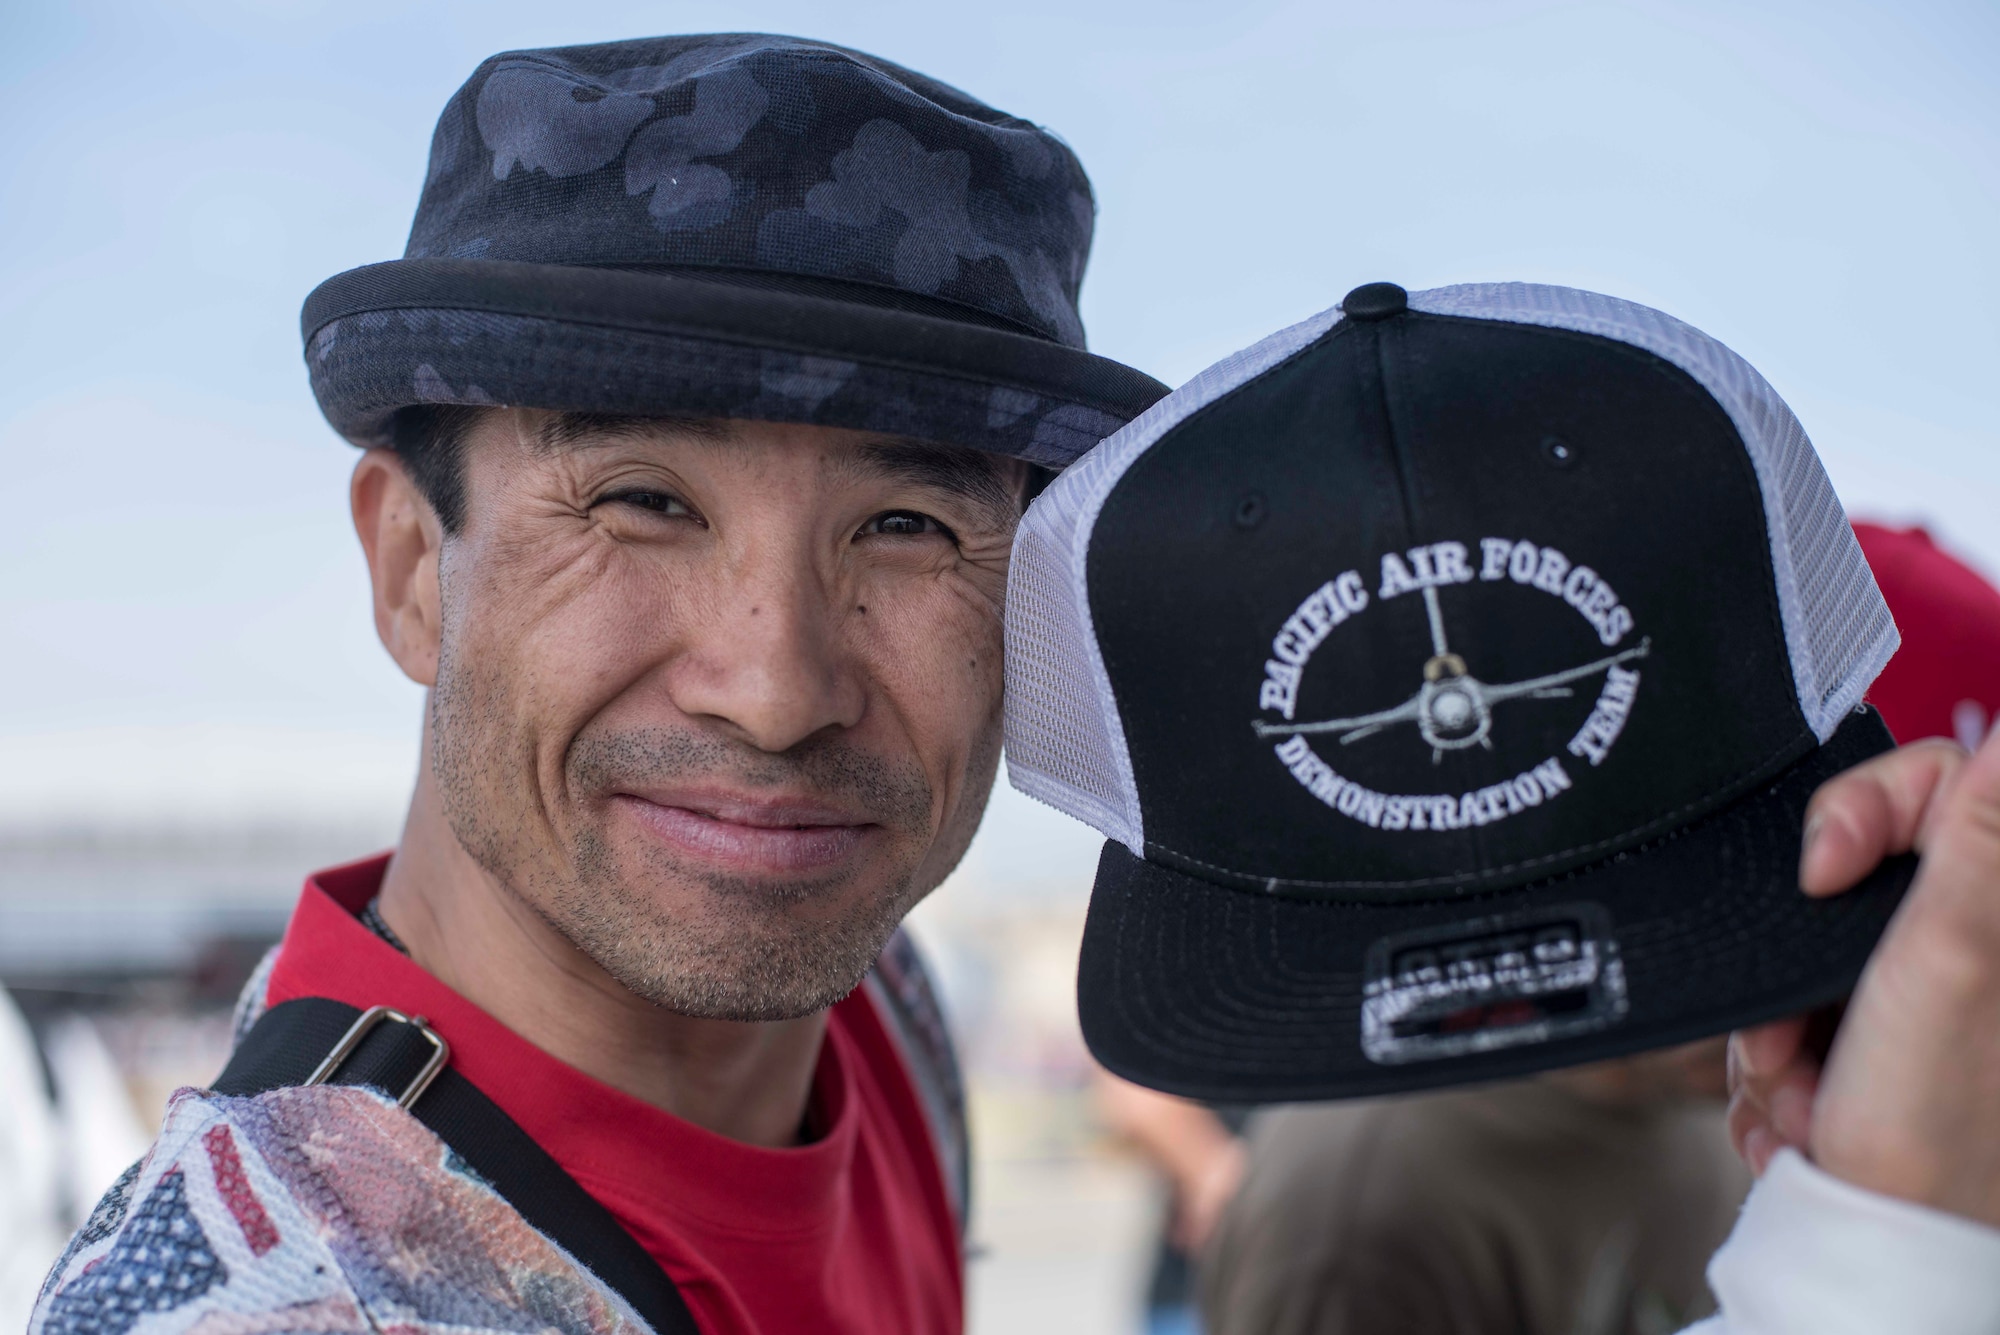 A 43rd Japan Maritime Self-Defense Force – Marine Corps Air Station Iwakuni Friendship Day 2019 guest holds a Pacific Air Forces Demonstration Team hat at MCAS Iwakuni, May 5, 2019. Attendees could purchase mementoes and souvenirs during the show. These items gave event spectators a way to promote and display their support for the PACAF F-16 Demo Team. (U.S. Air Force photo by Senior Airman Collette Brooks)